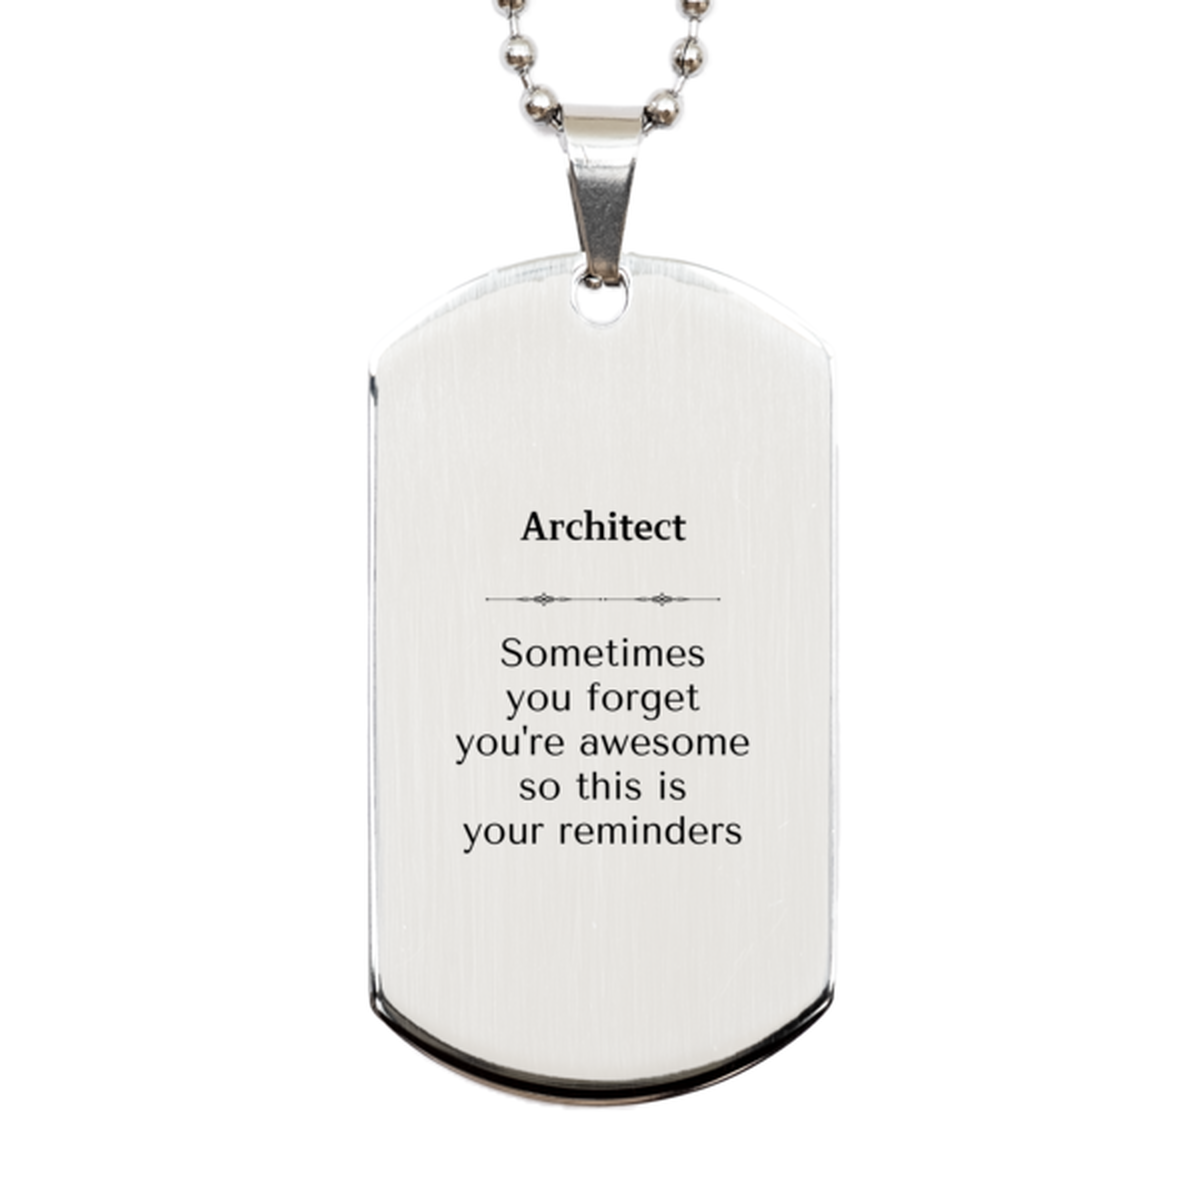 Sentimental Architect Silver Dog Tag, Architect Sometimes you forget you're awesome so this is your reminders, Graduation Christmas Birthday Gifts for Architect, Men, Women, Coworkers